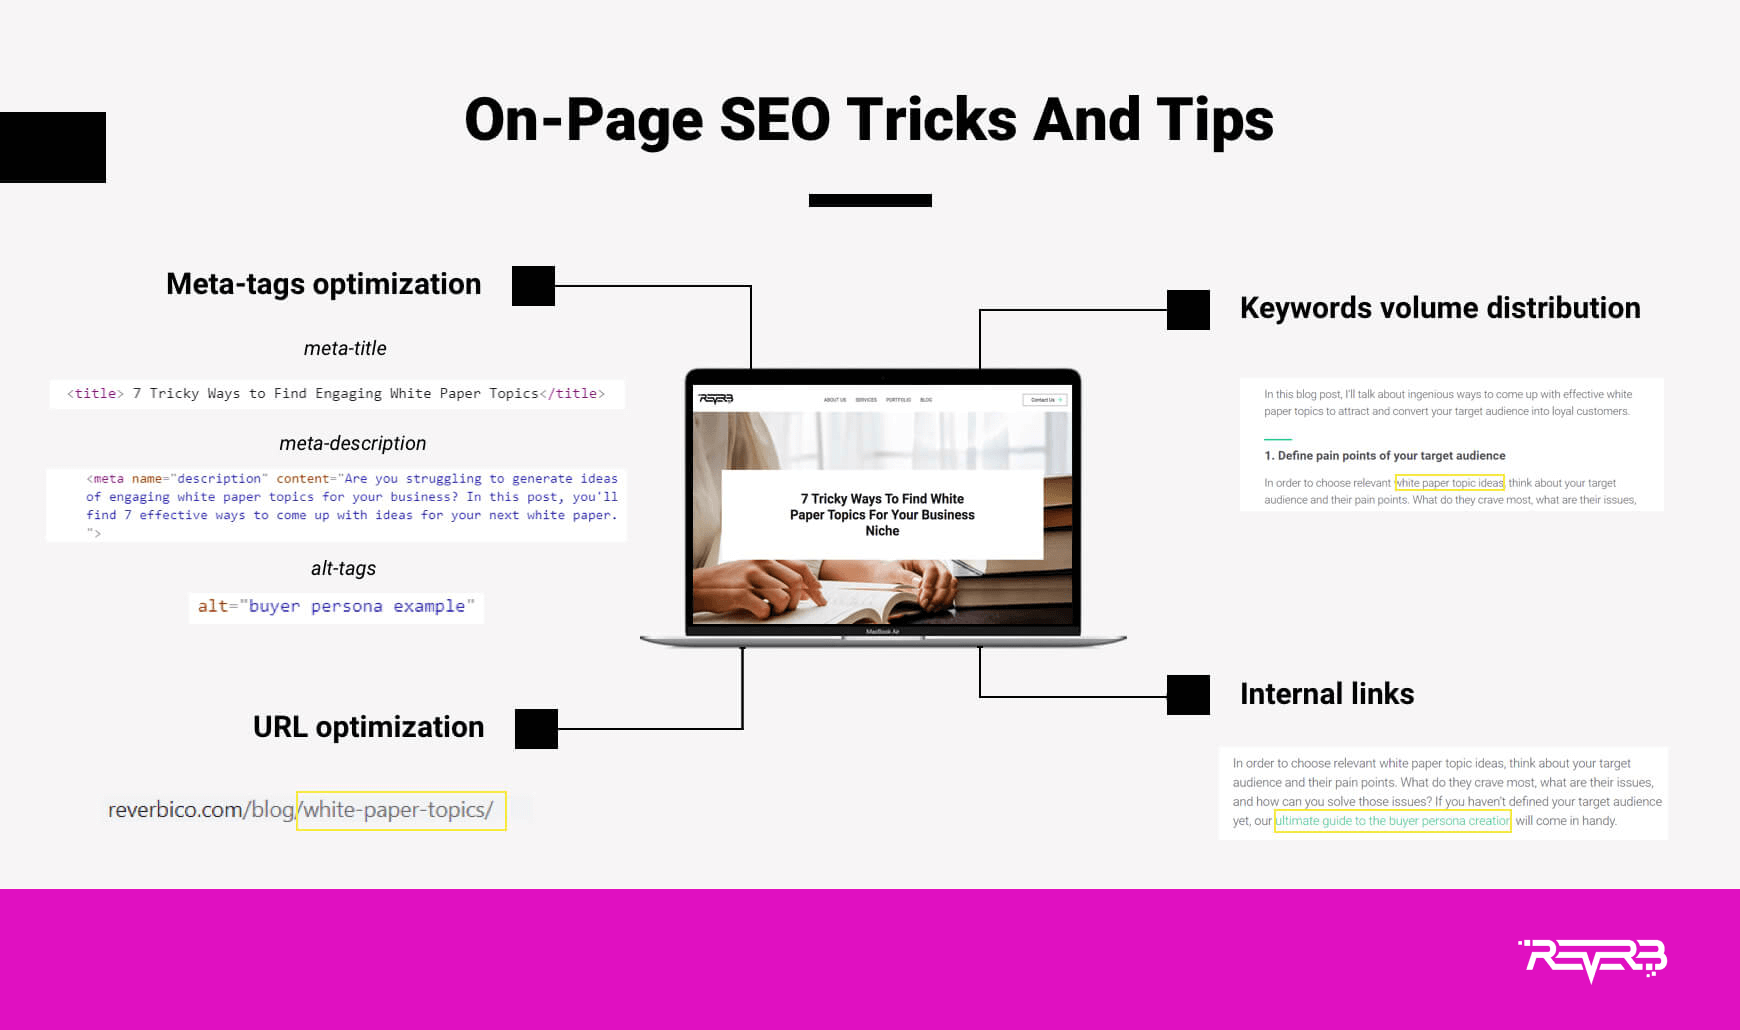 on-page SEO tips